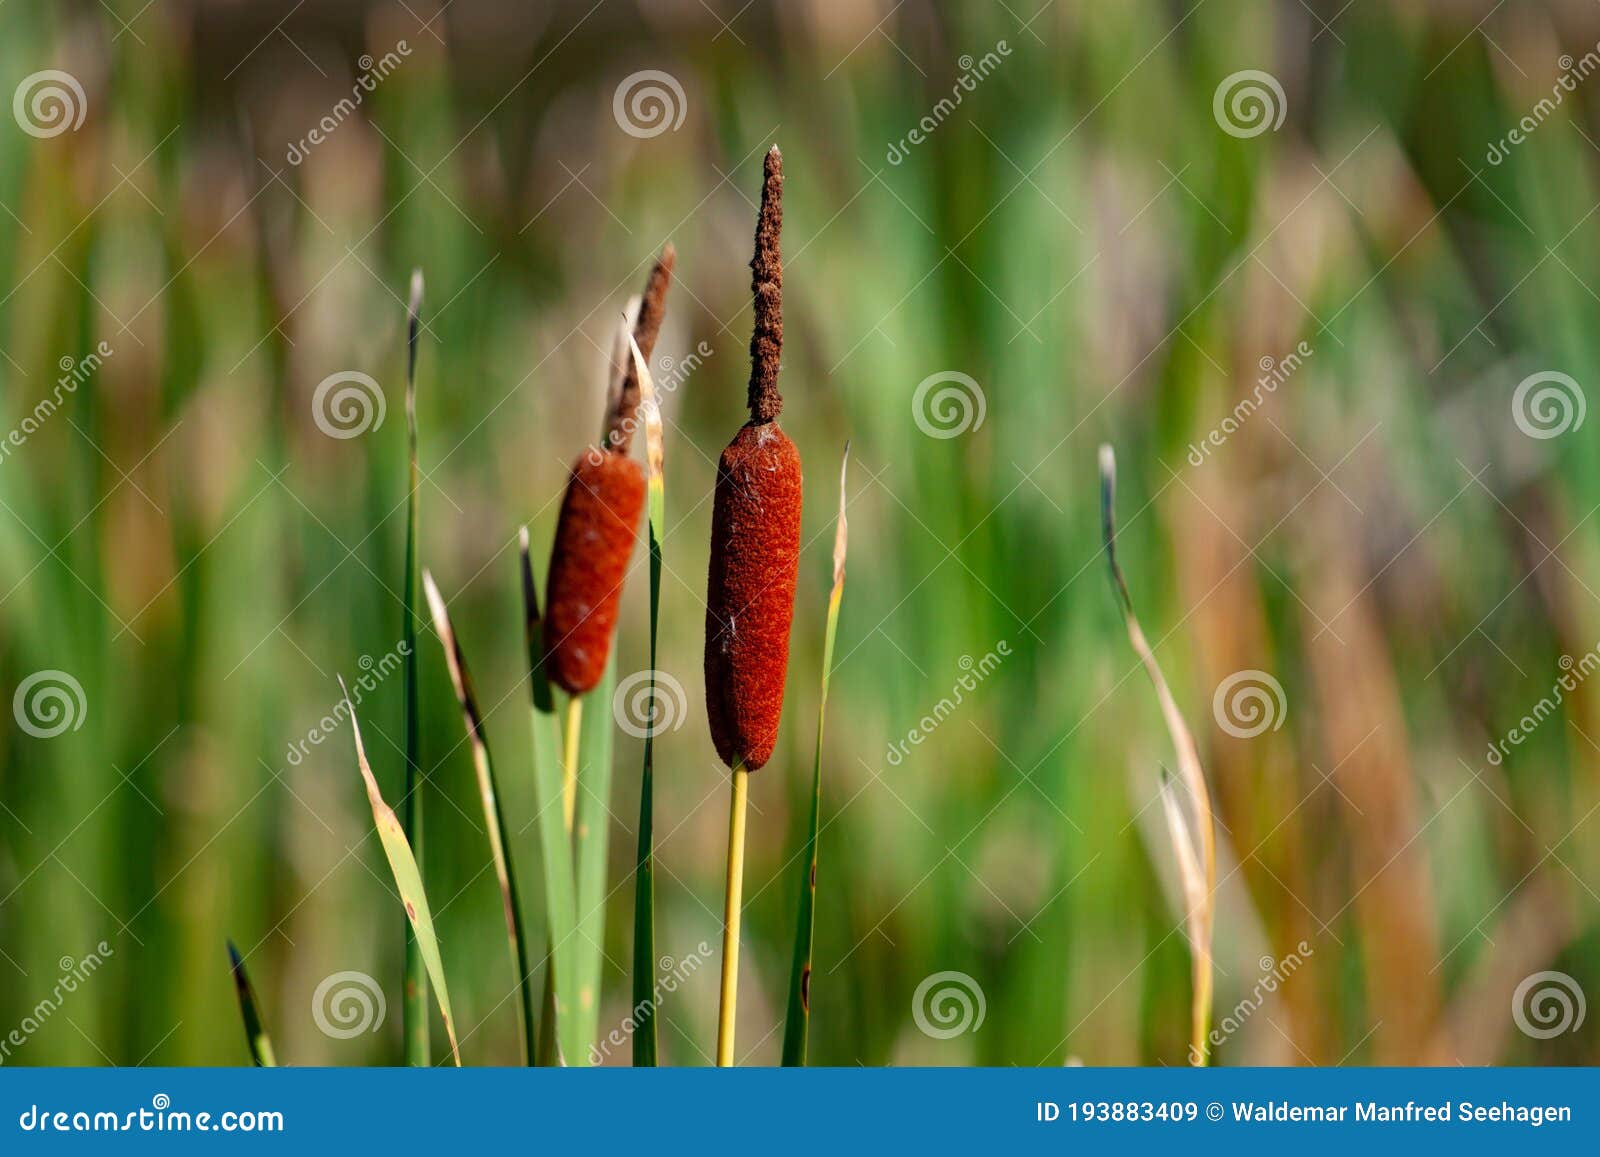 selective focus on seeds of southern cattail. typha domingensis against blurred background.